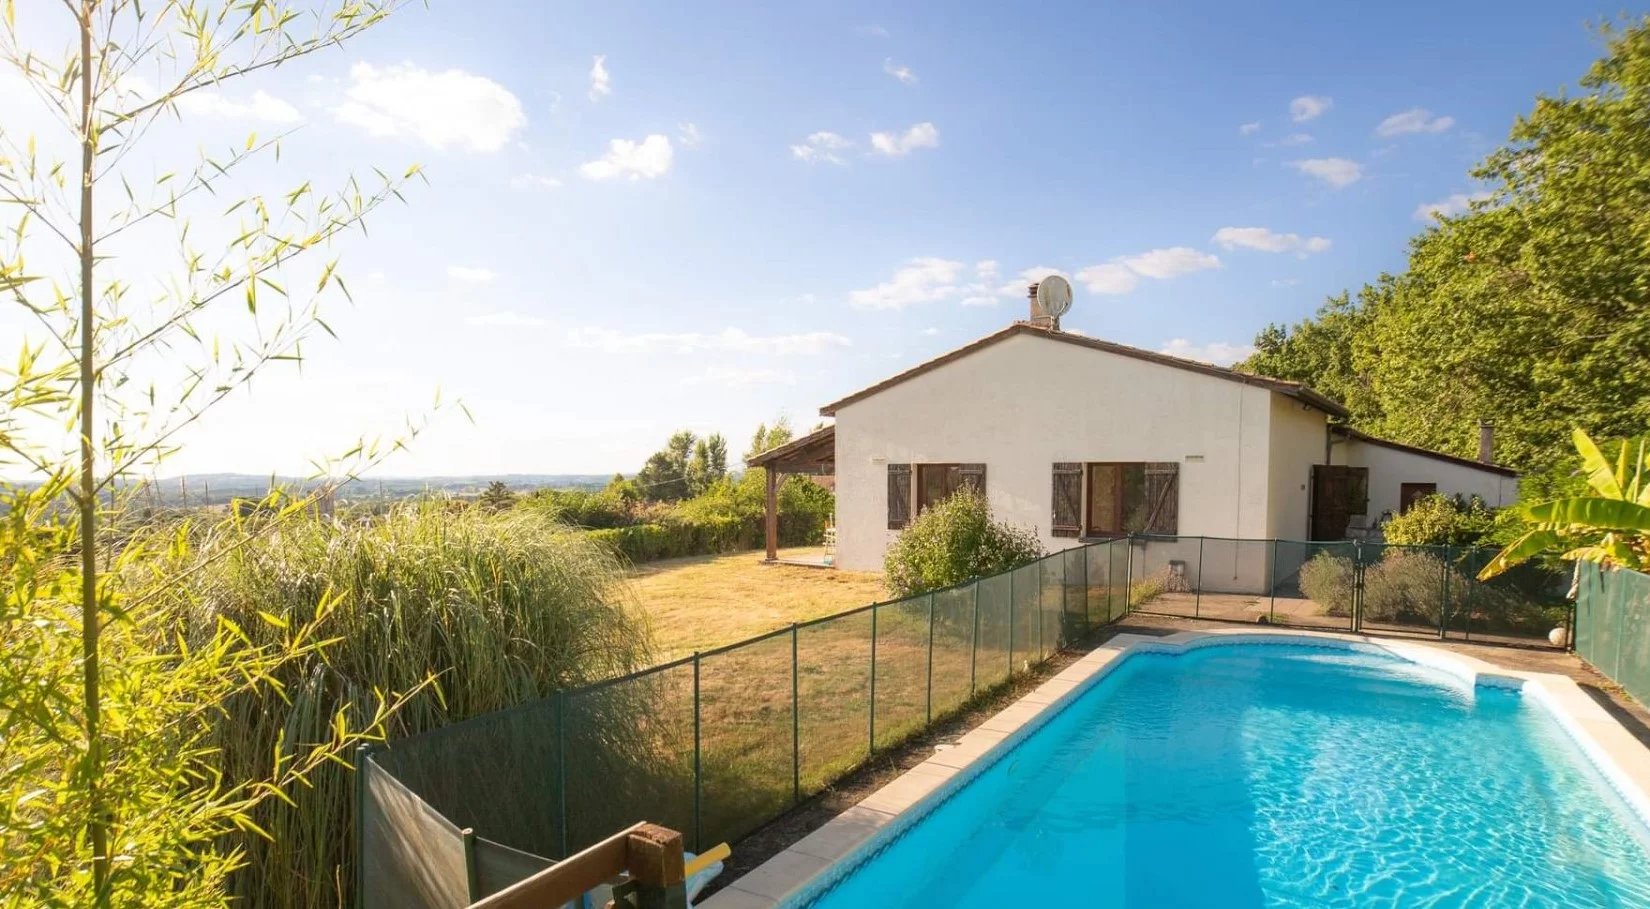 4 bedroom house with pool and view over the countryside